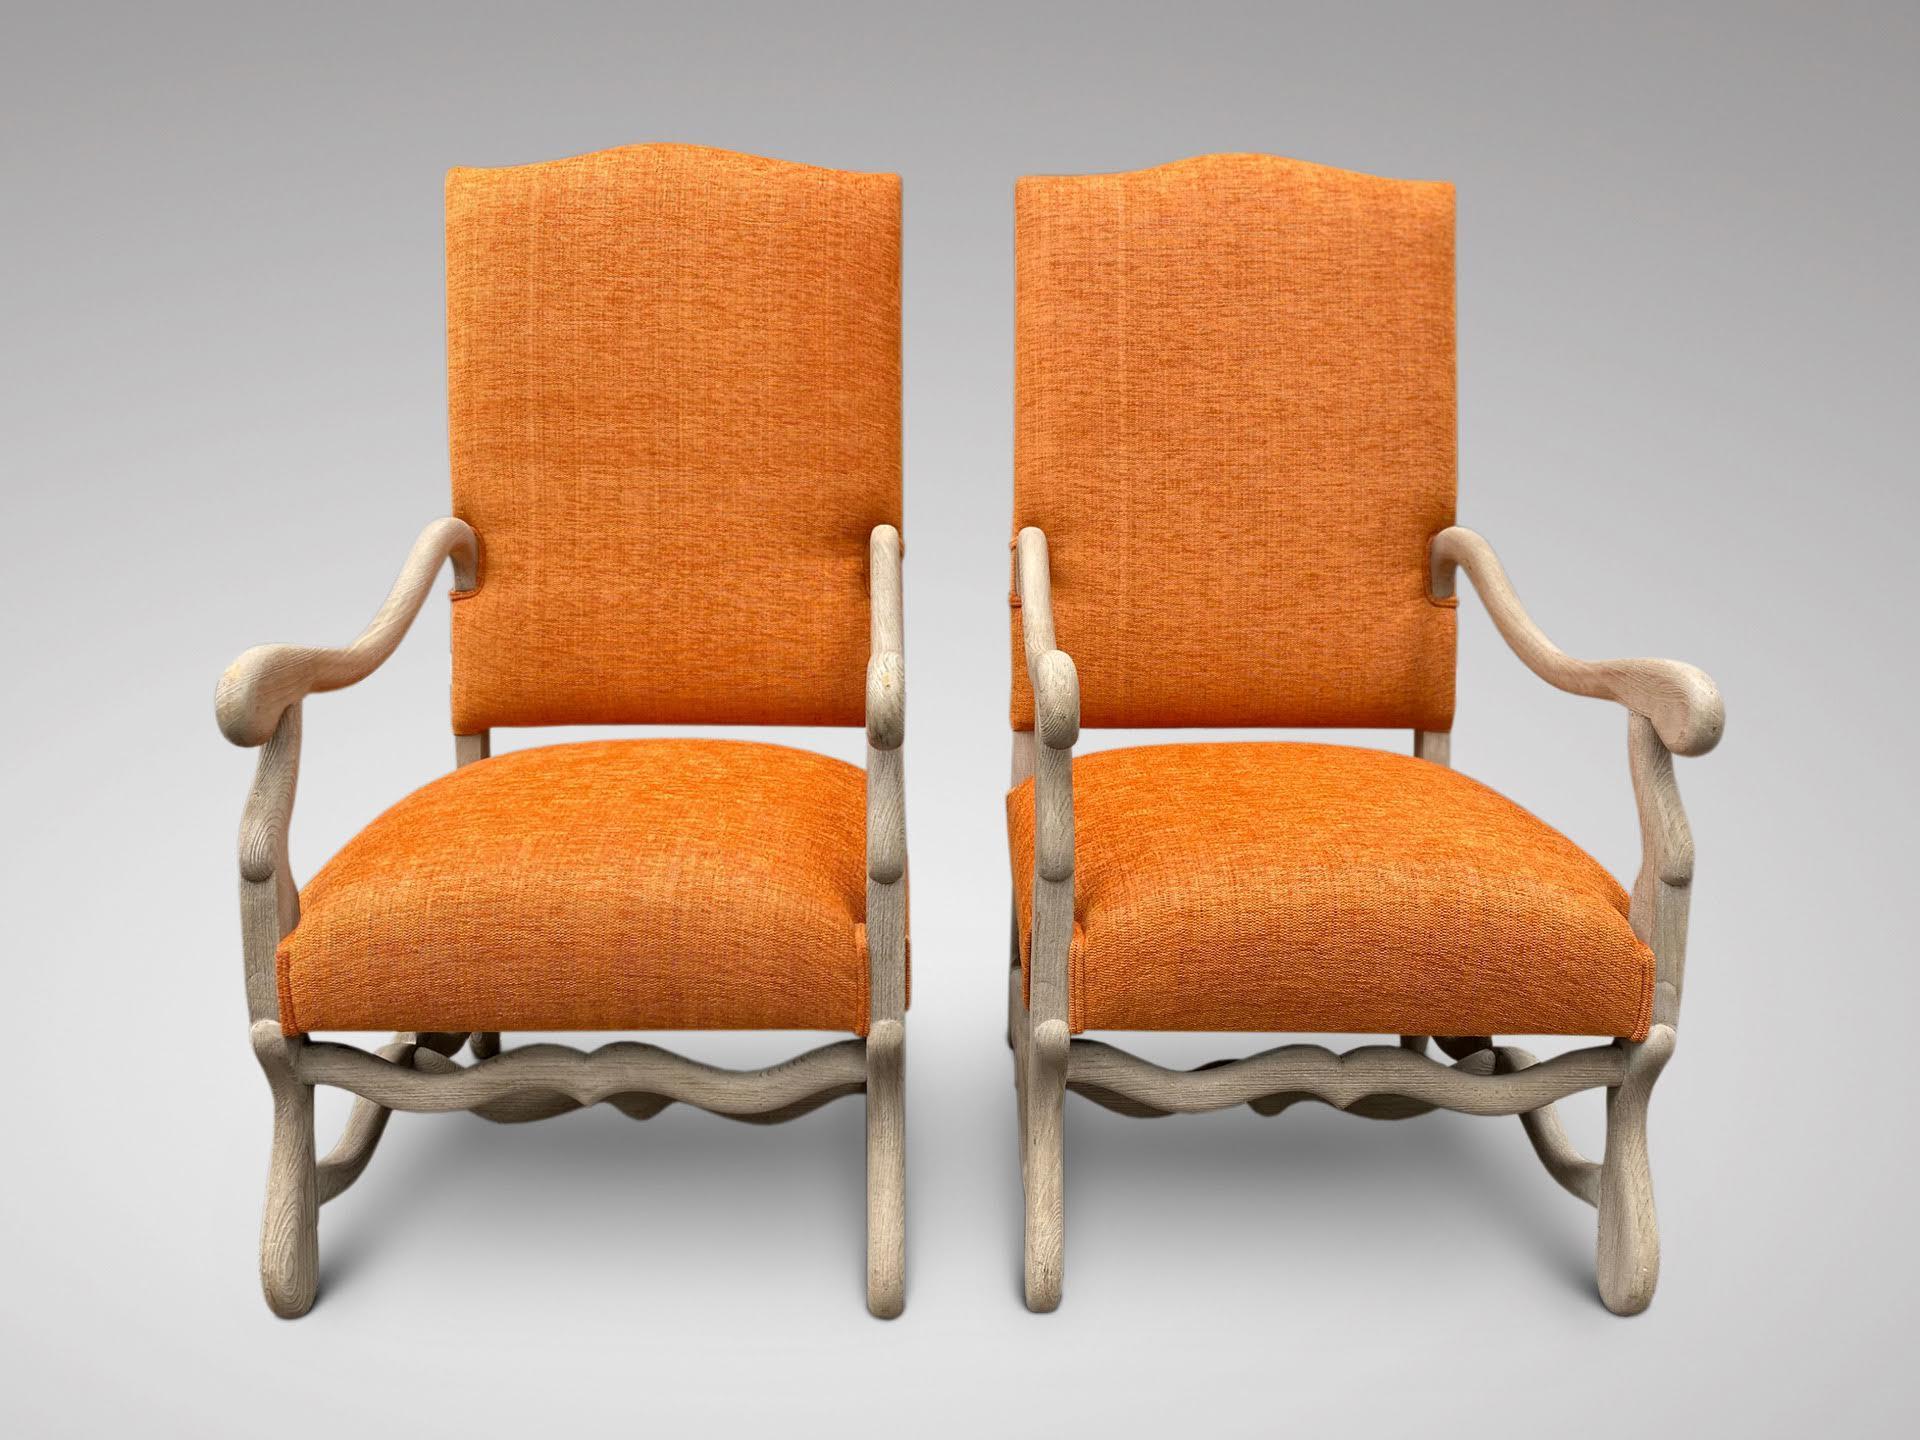 A superb pair of 19th century Antique French walnut reupholstered armchairs, Louis XIV Style, reupholstered in quality orange colour fabric. Shaped arms and supported on elegant shaped legs with scroll feet united by a shaped stretcher. Beautiful